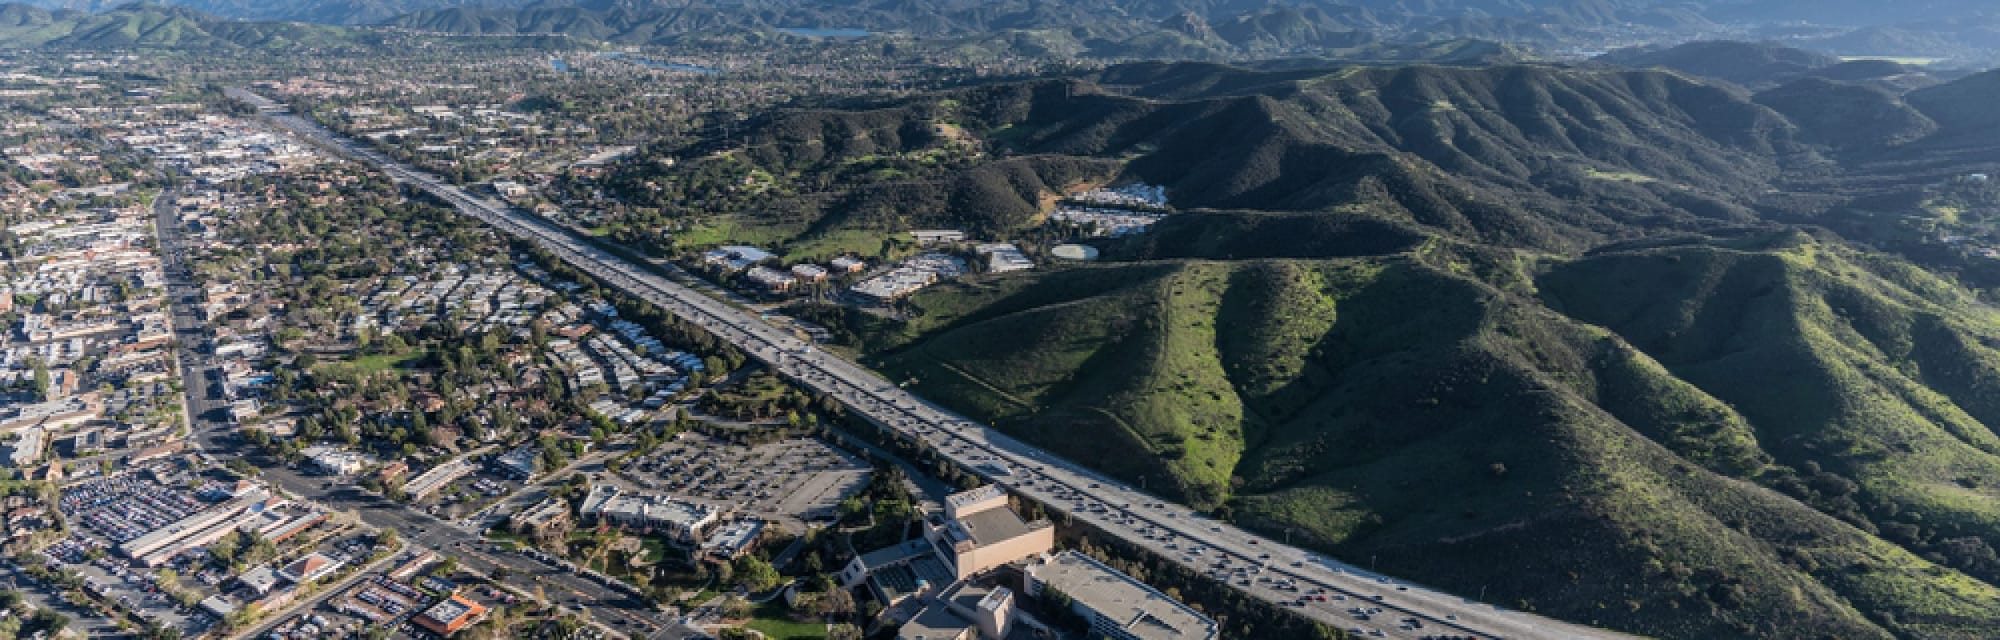 Aerial,View,Of,101,Freeway,In,Suburban,Thousand,Oaks,Near